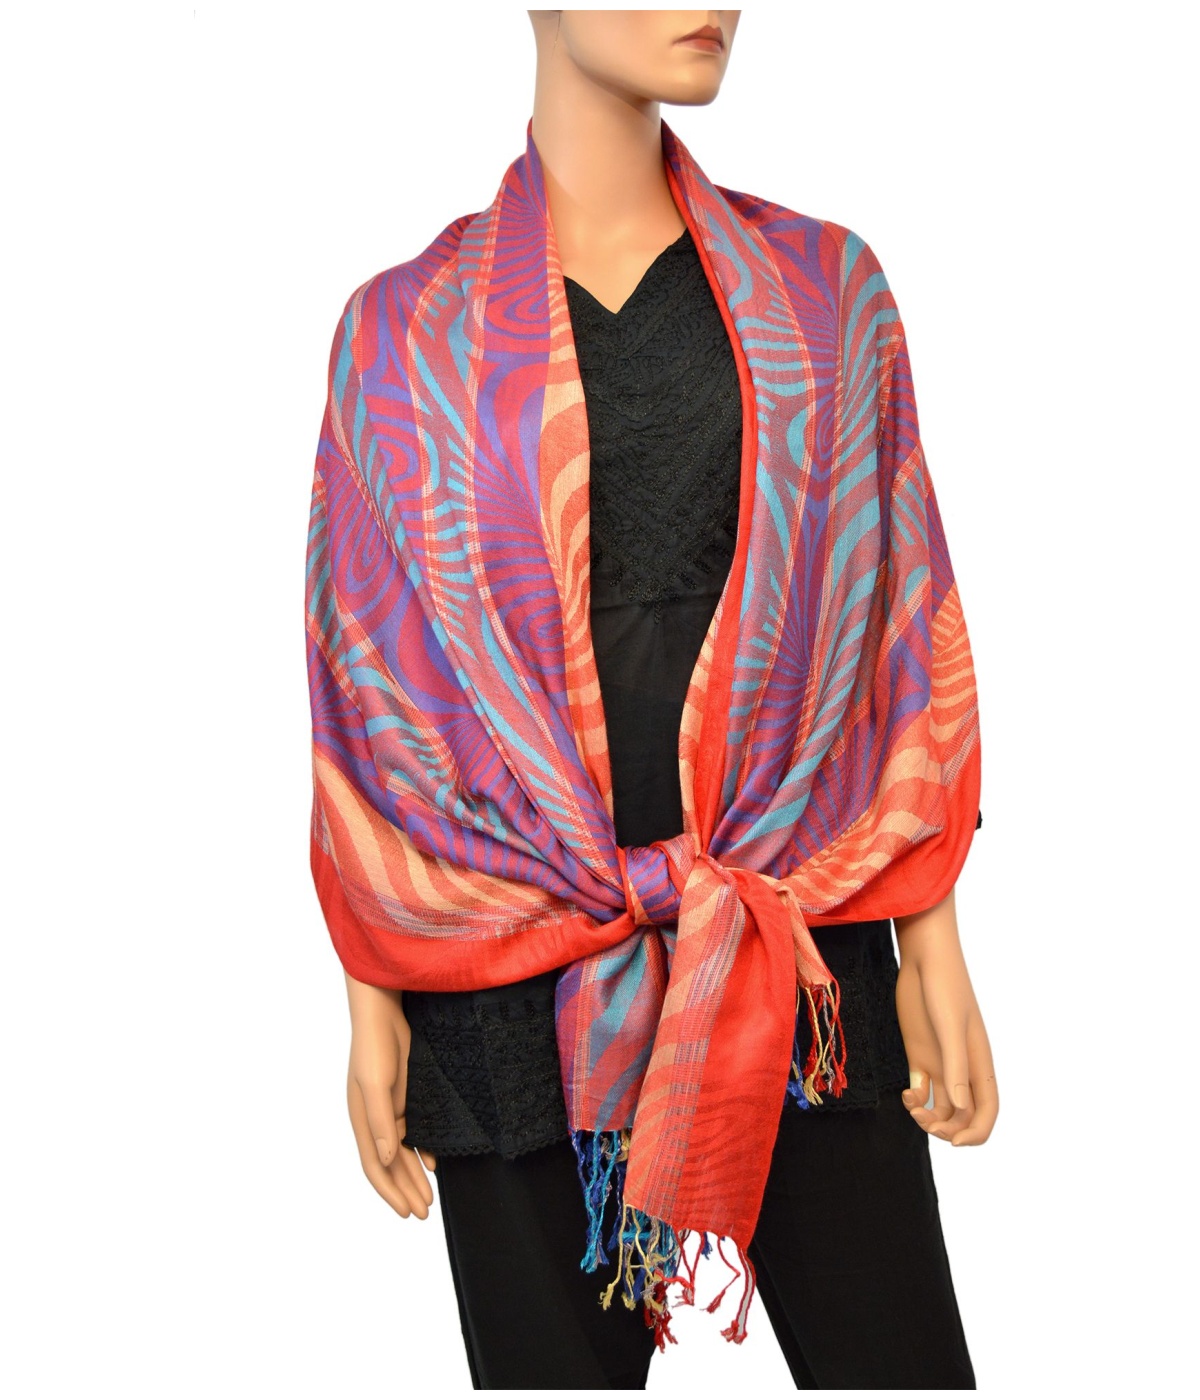 Reversible Multicolor Silk Stole with Abstract Designs - General Category